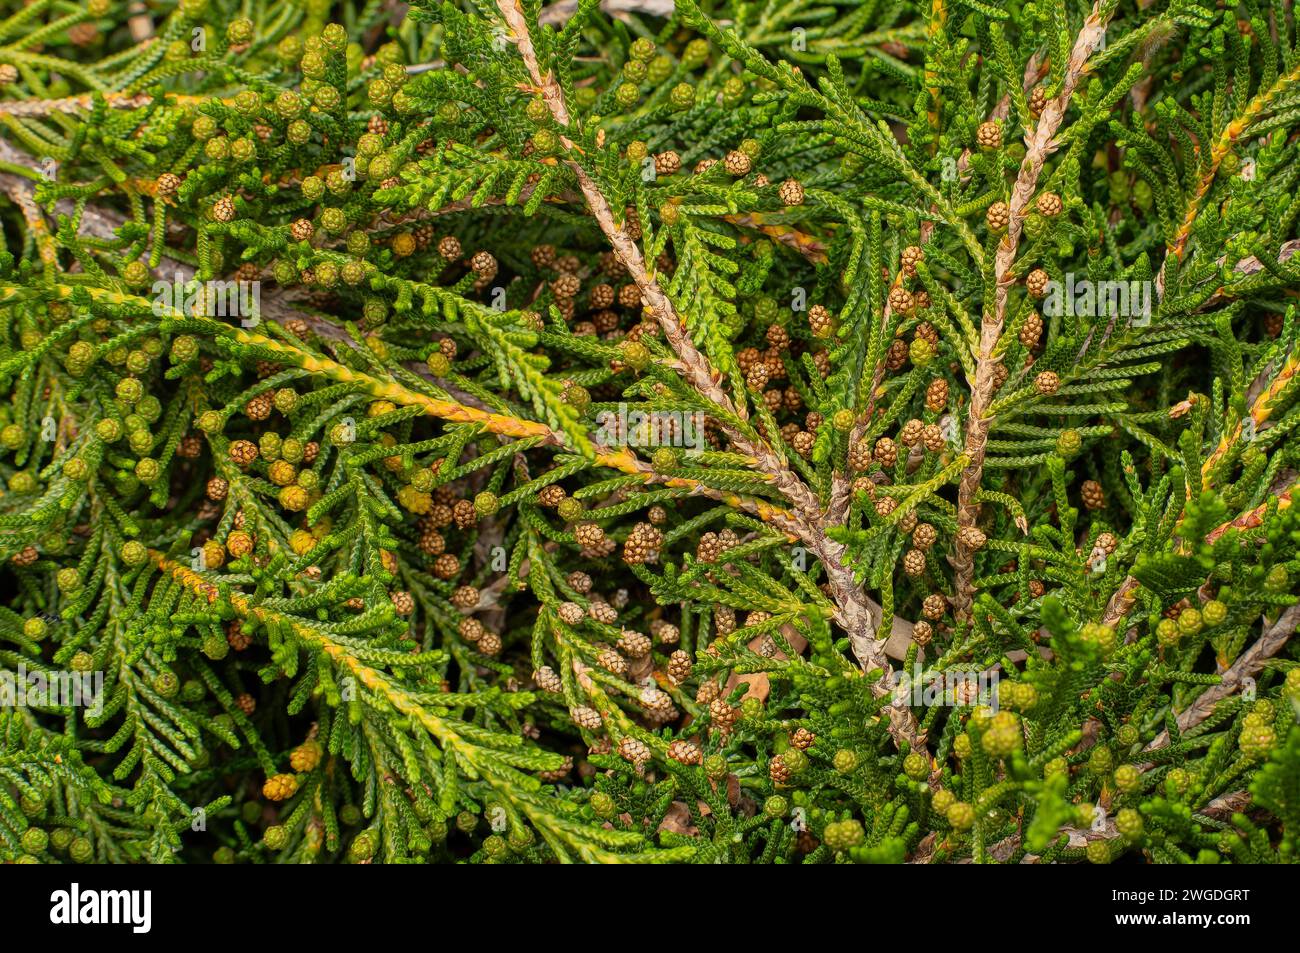 Creeping Strawberry Pine, Microcachrys tetragona with cones; a dioecious conifer in the podocarp family. Tasmania. Stock Photo